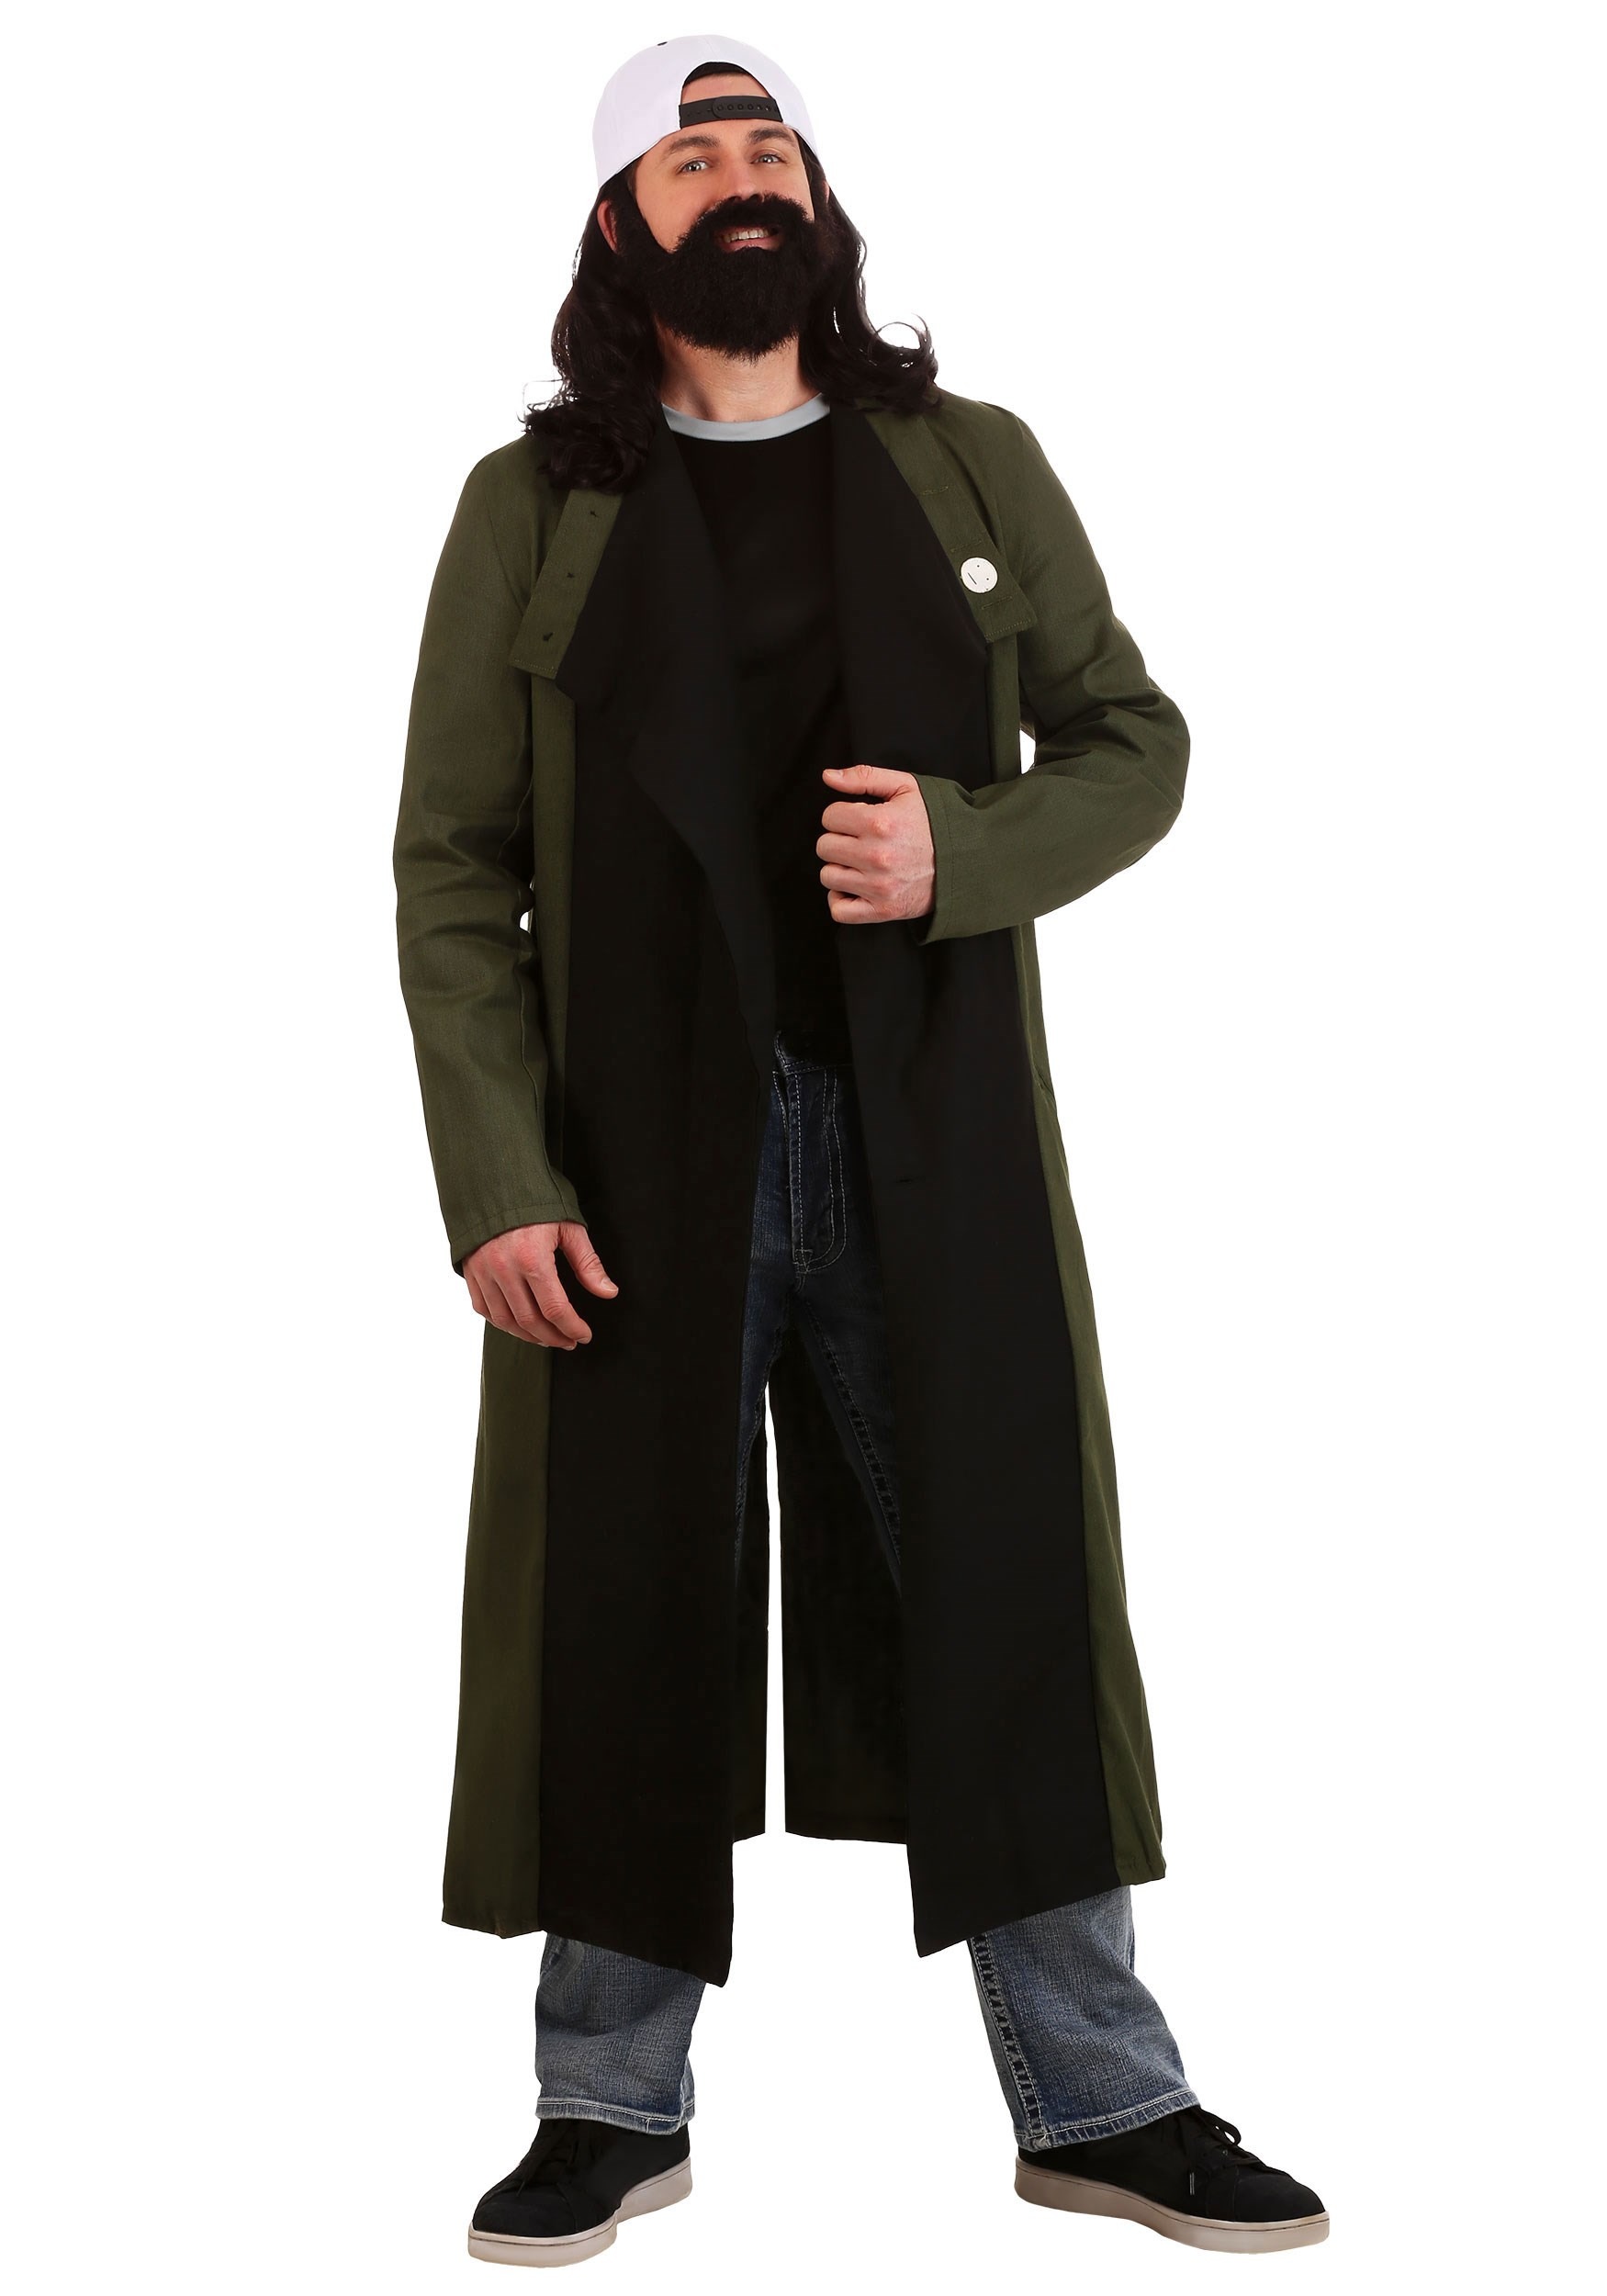 Jay and Silent Bob Silent Bob Costume for Plus Size | Officially licensed